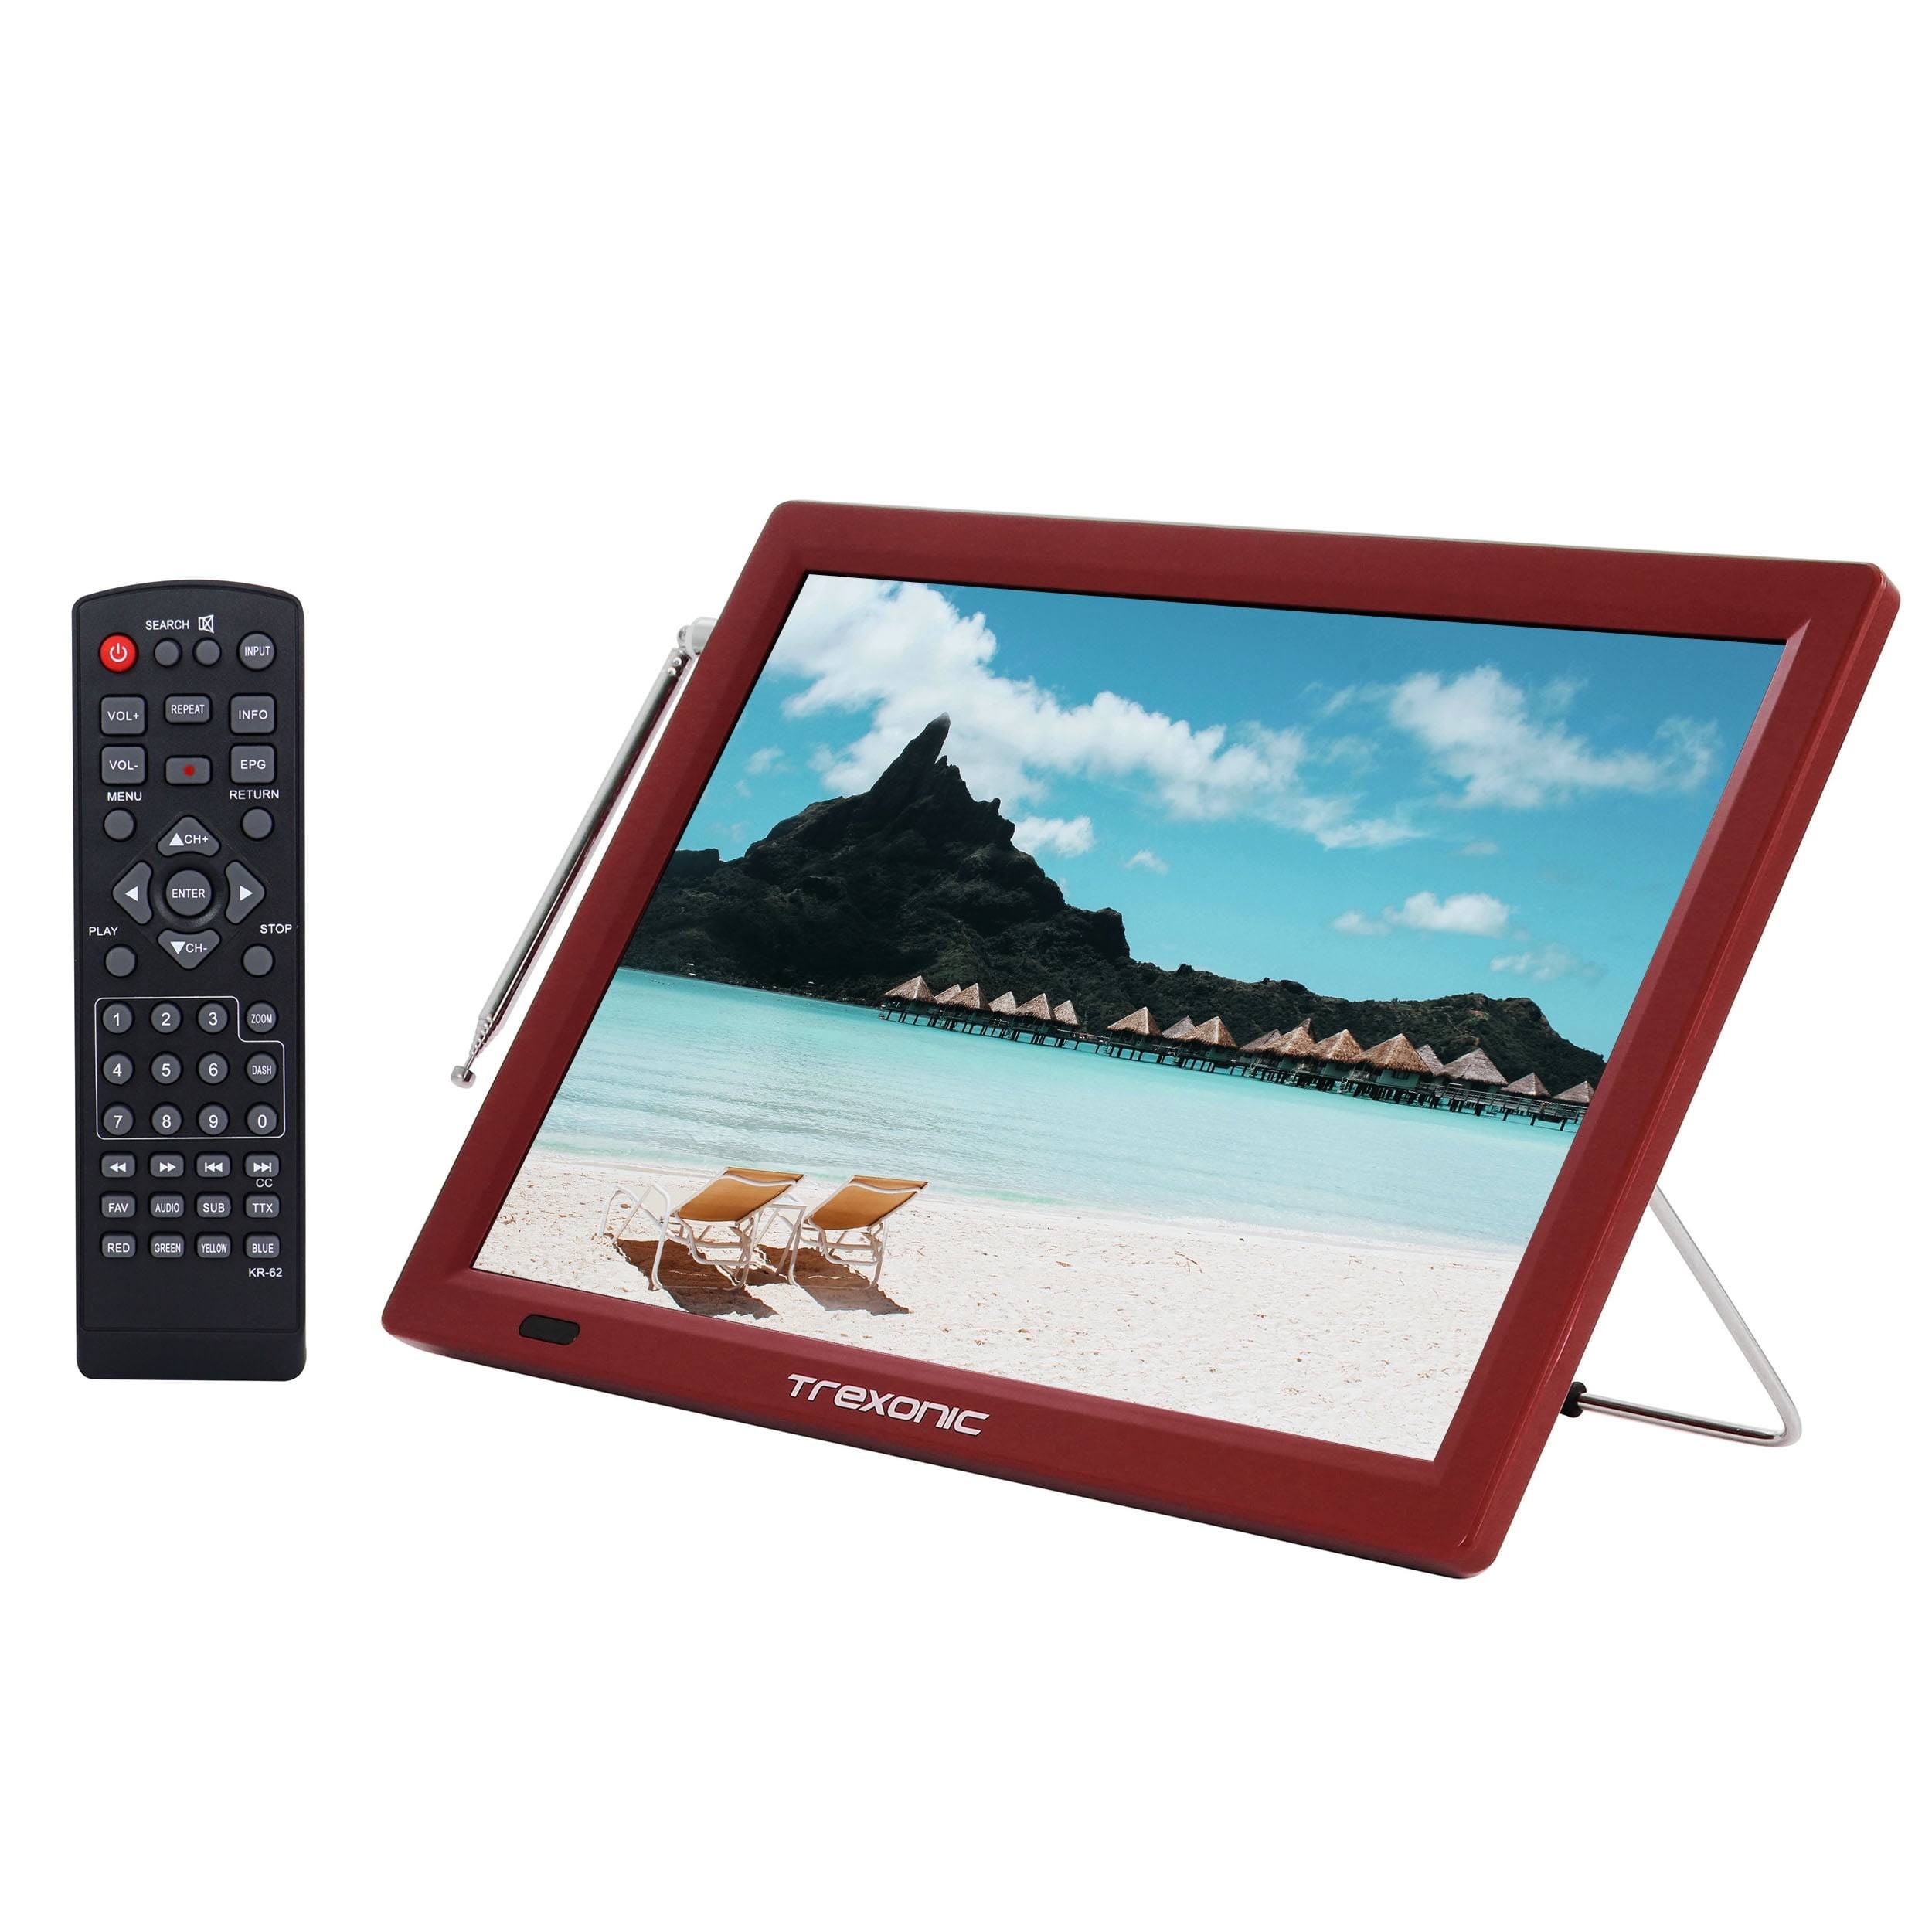 Affordable Portable LED TV with 14-inch Display and Detachable Antenna | Image